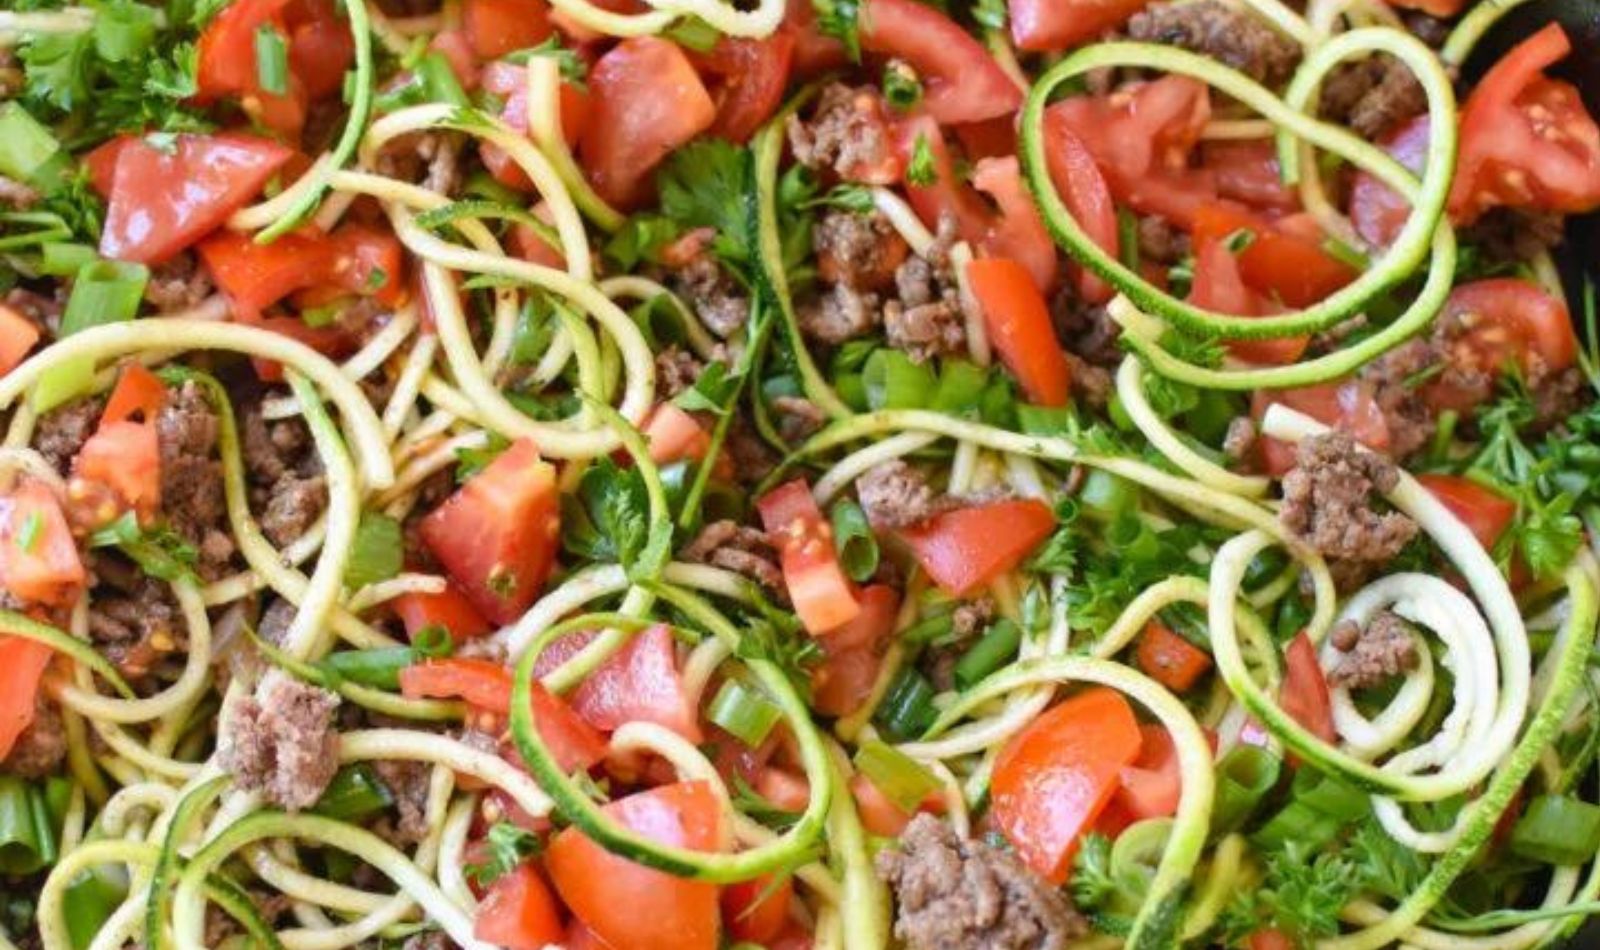 image tomatoes, zucchini and other spiralized veggies in a cast iron skillet